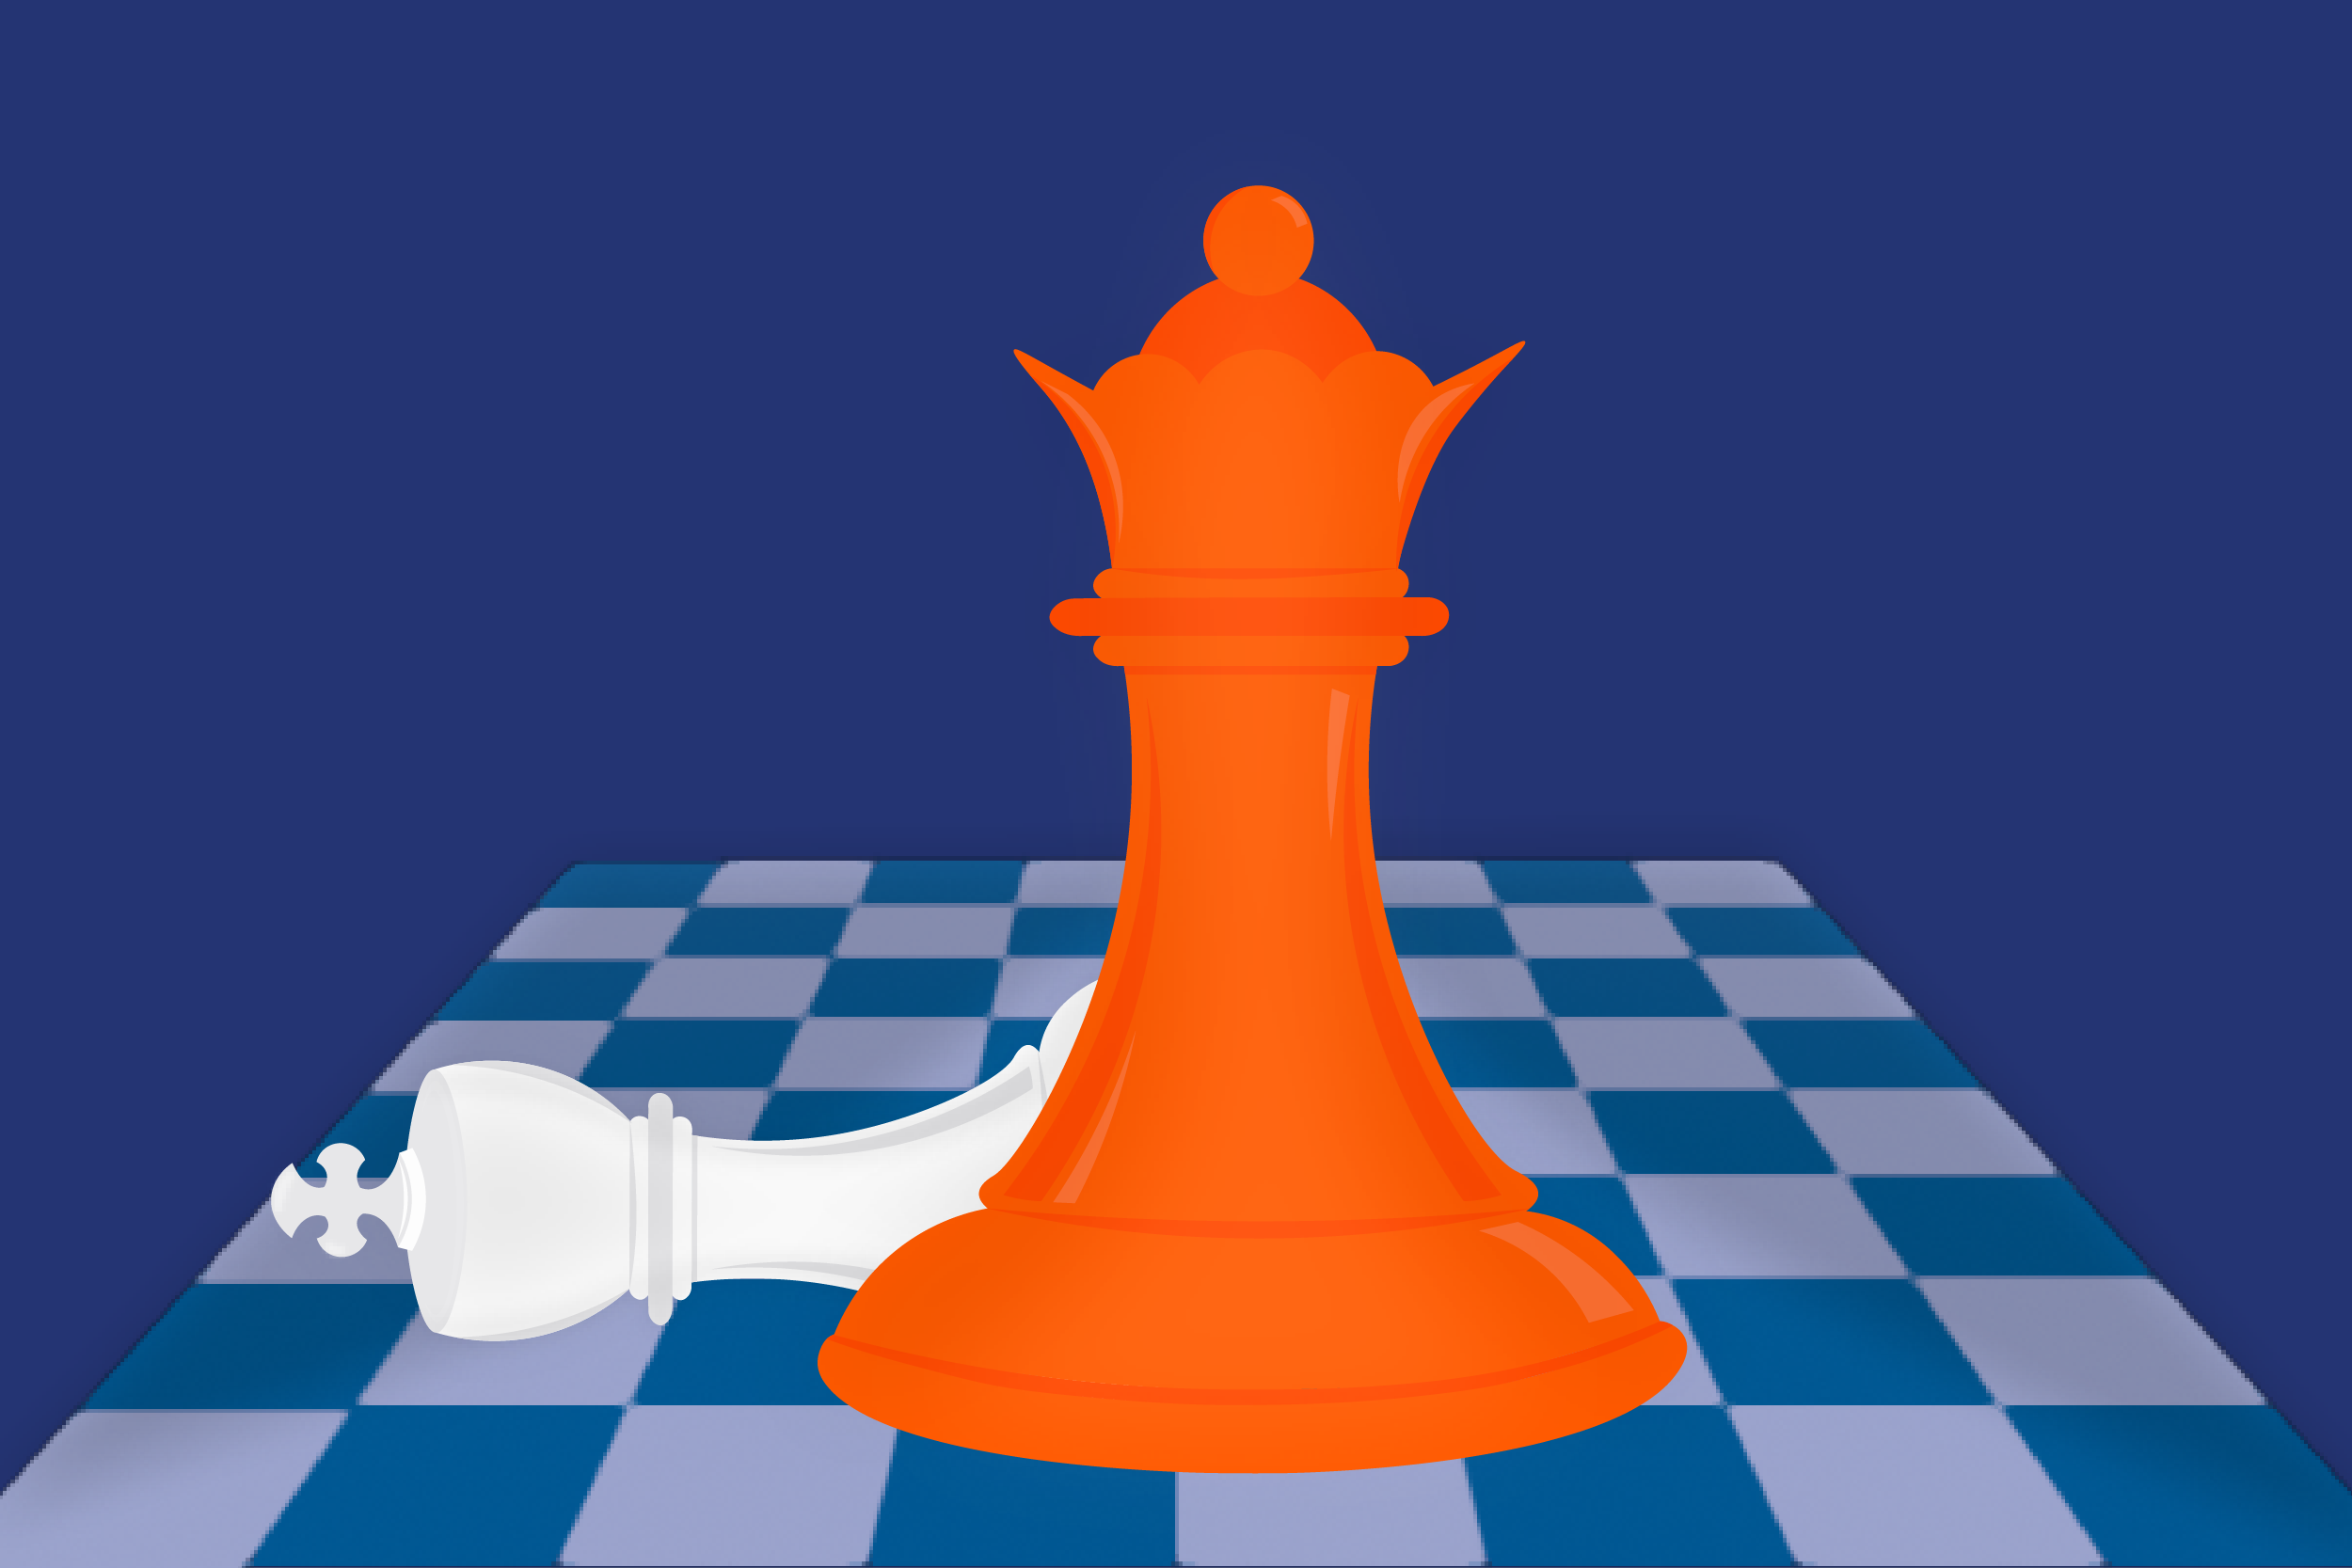 Chess pieces on a chessboard imagery with YPTC color theme (blue, orange and white)